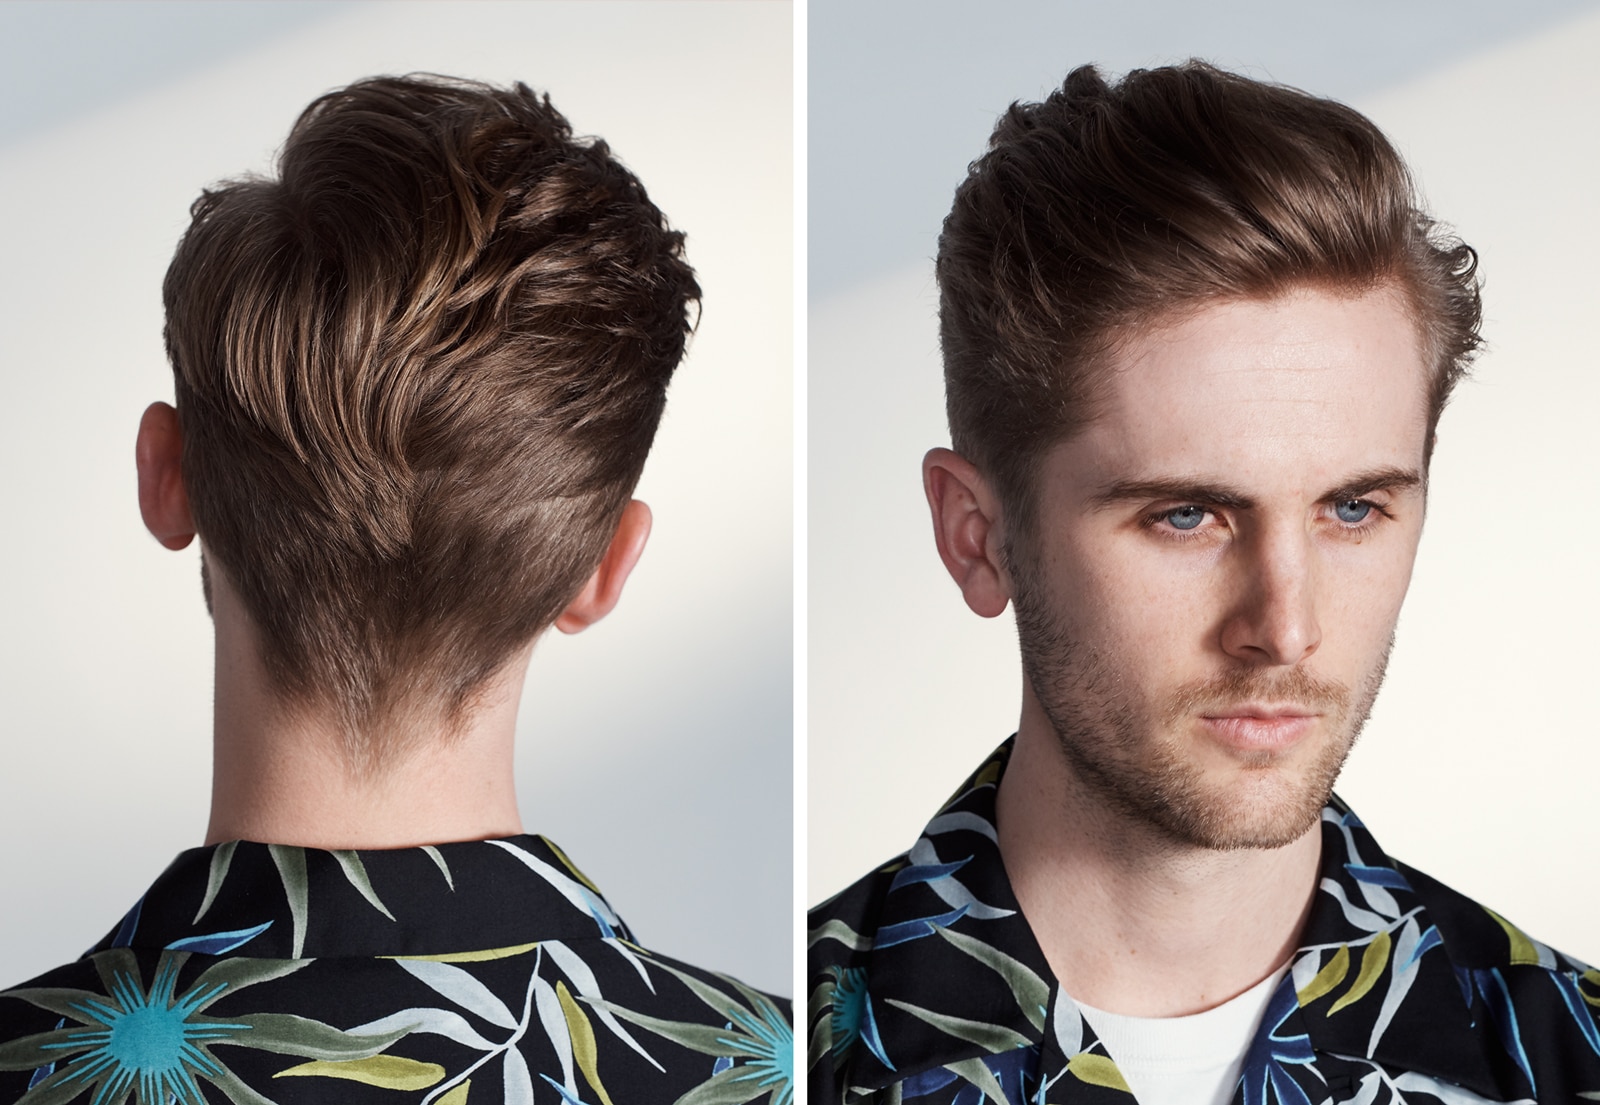 Seven Of The Best Haircuts For Summer | The Journal | MR PORTER